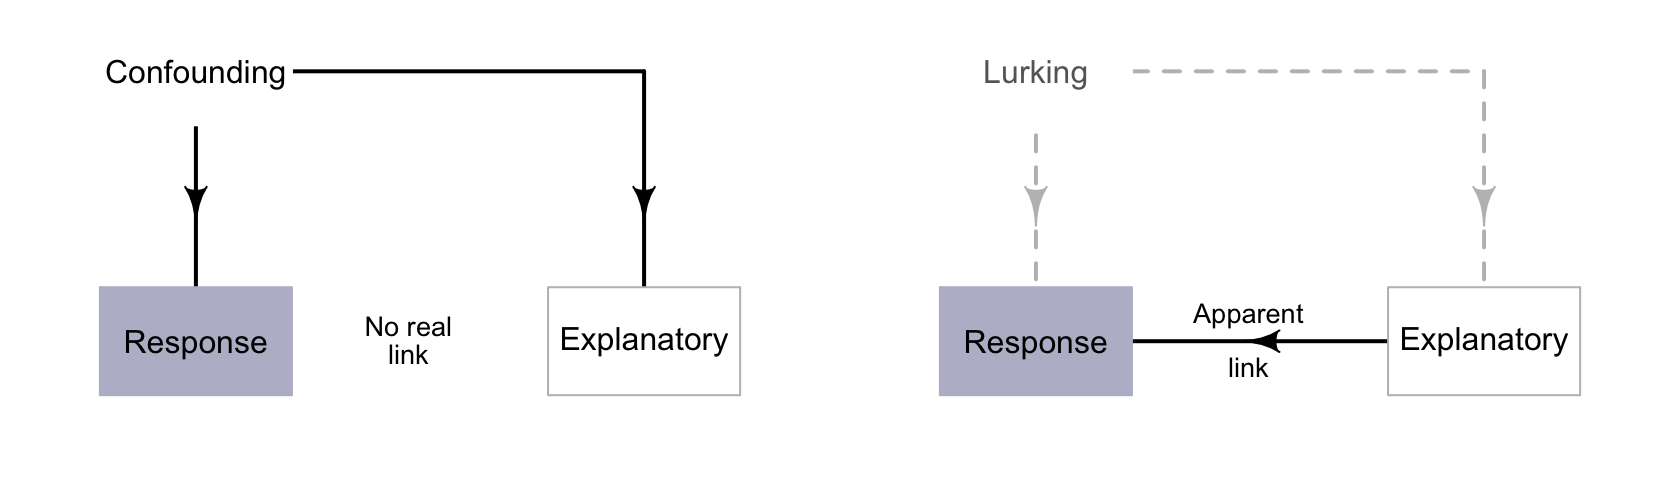 Confounding variables (left) are extraneous variables associated with the response and explanatory variables. Lurking variables (right) are associated with the response and explanatory variables, but are not recorded